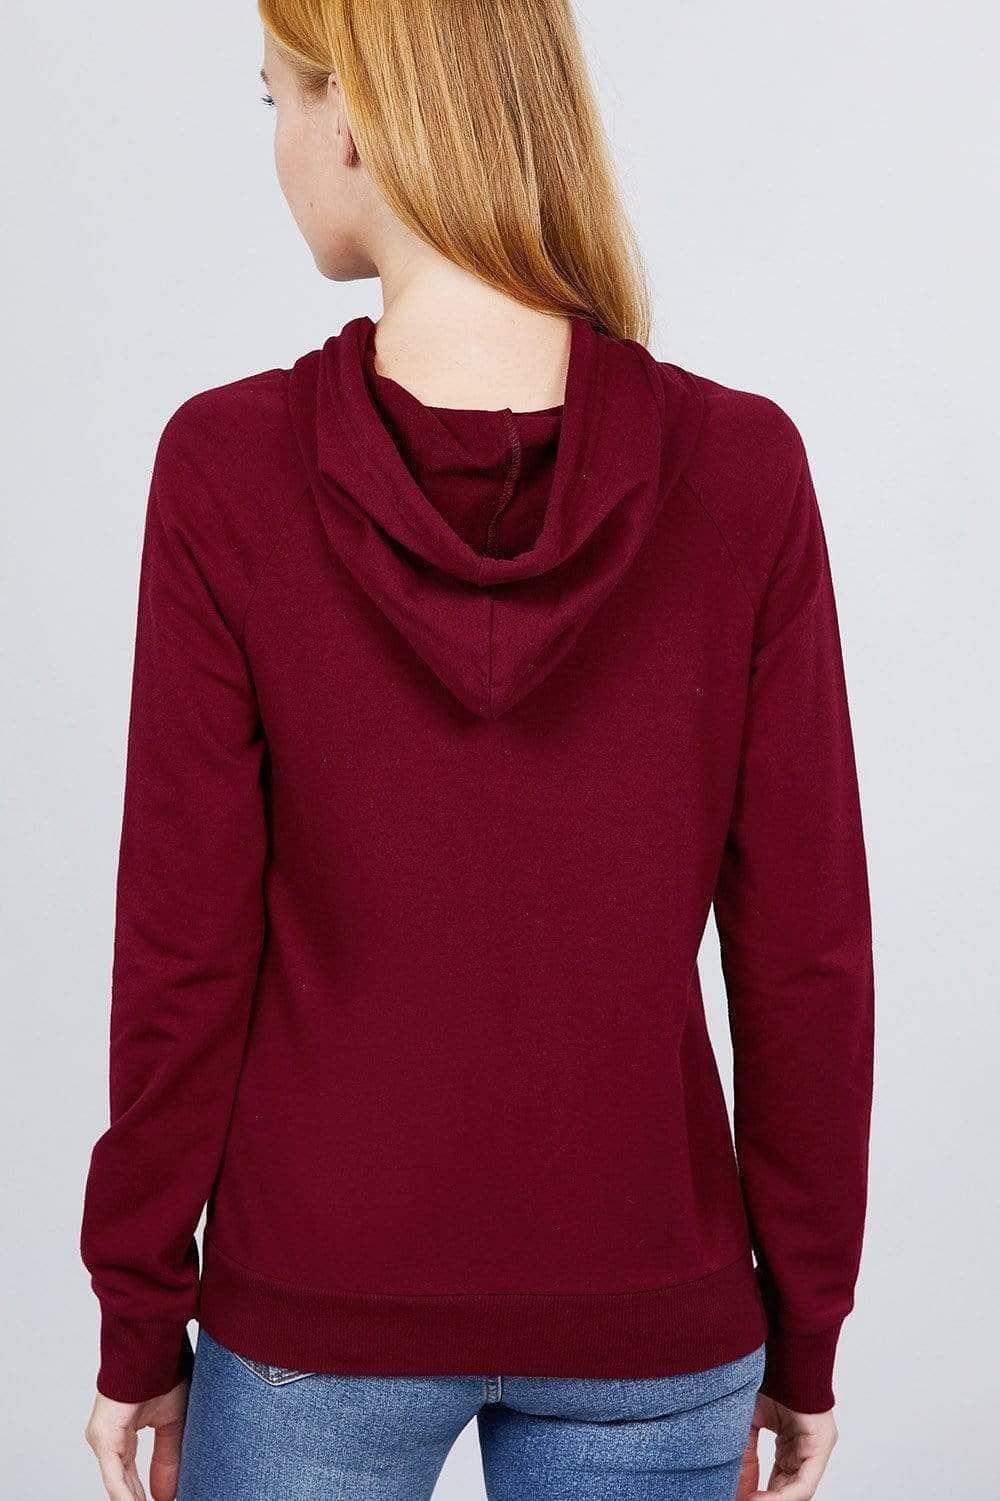 Wine Long Sleeve French Terry Sweatshirt - Shopping Therapy, LLC 